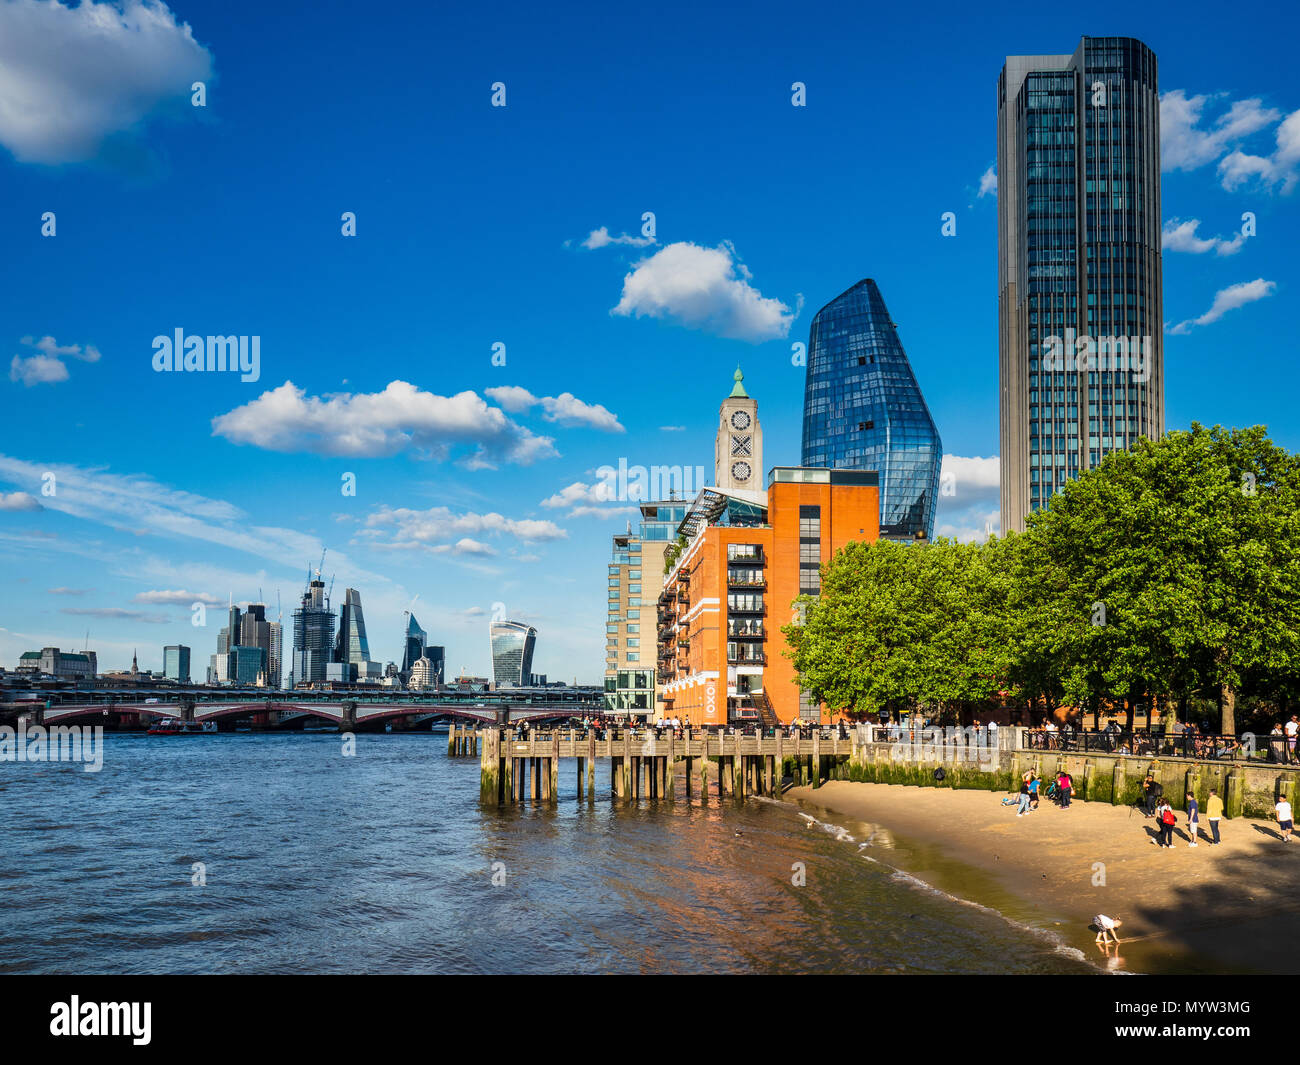 Thames Beach - people play and walk on the sandy beach on the River Thames on London's Southbank - London Tourism Stock Photo